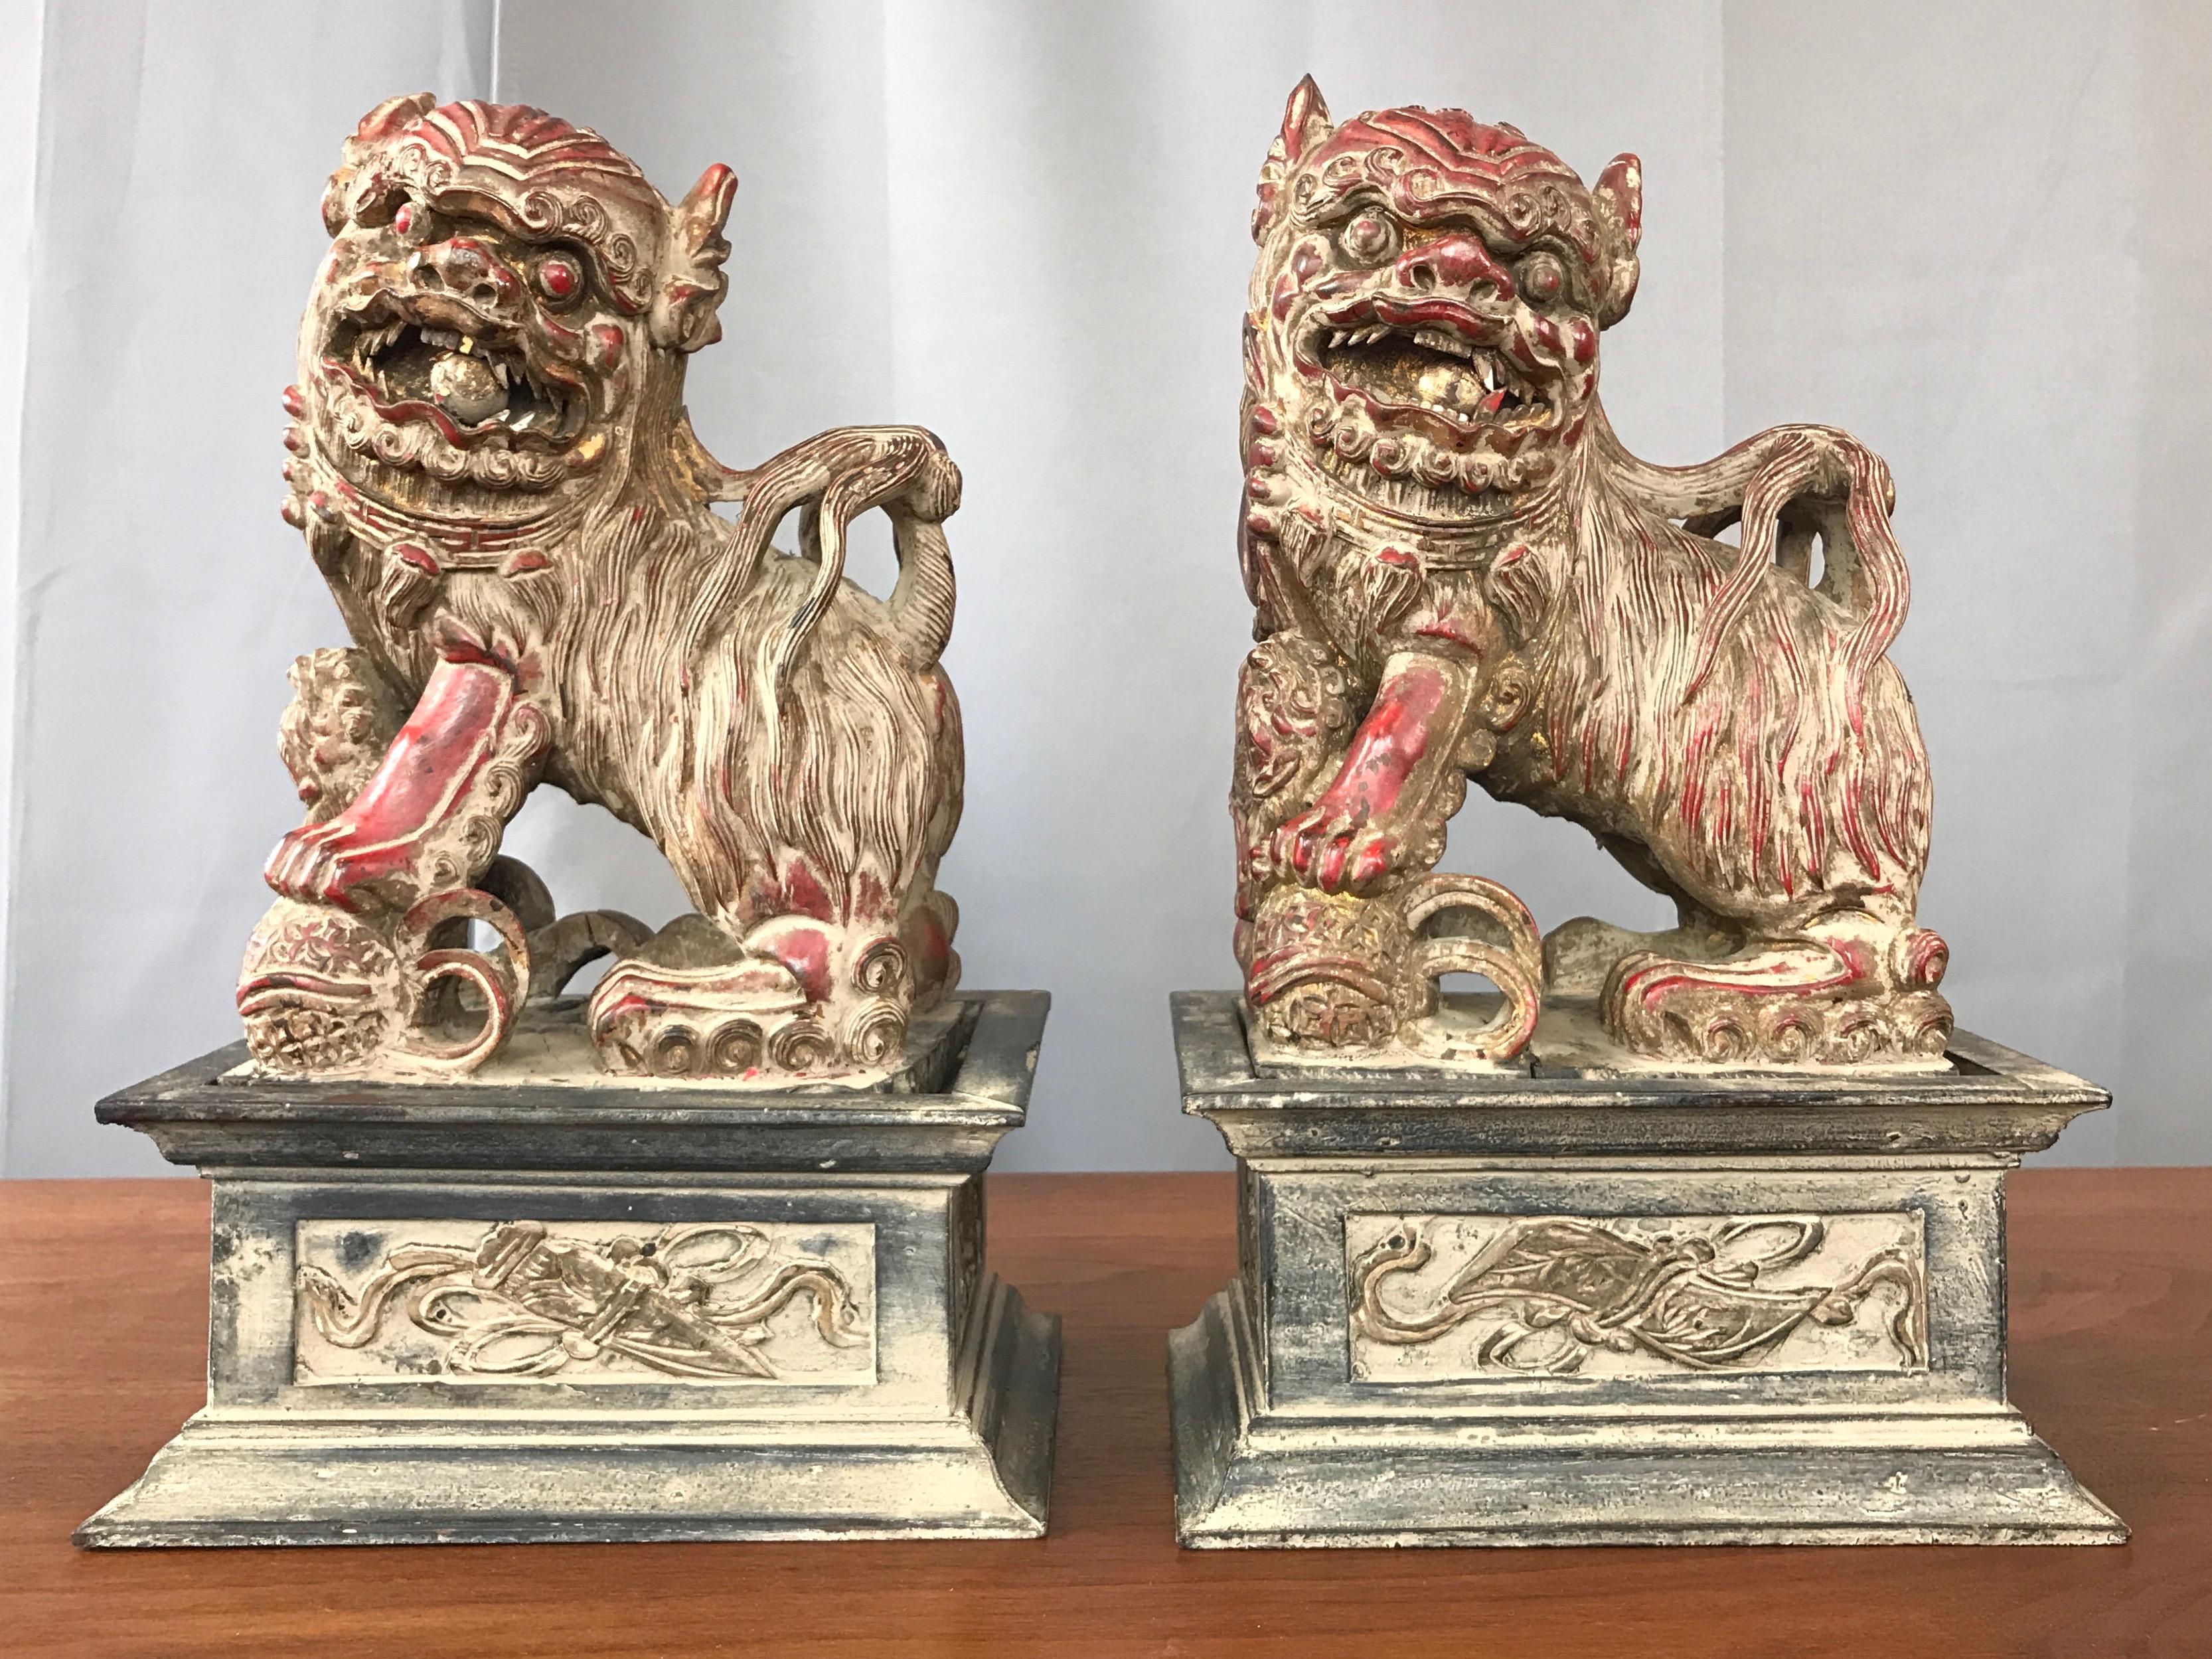 A pair of Chinese post-Qing period lacquered and gilt wood guardian lions—commonly known as “Foo Dogs”—on pedestal bases, circa 1920s–1930s.

Very finely carved sculptural figure displays exquisite detail while exuding fierce personality and